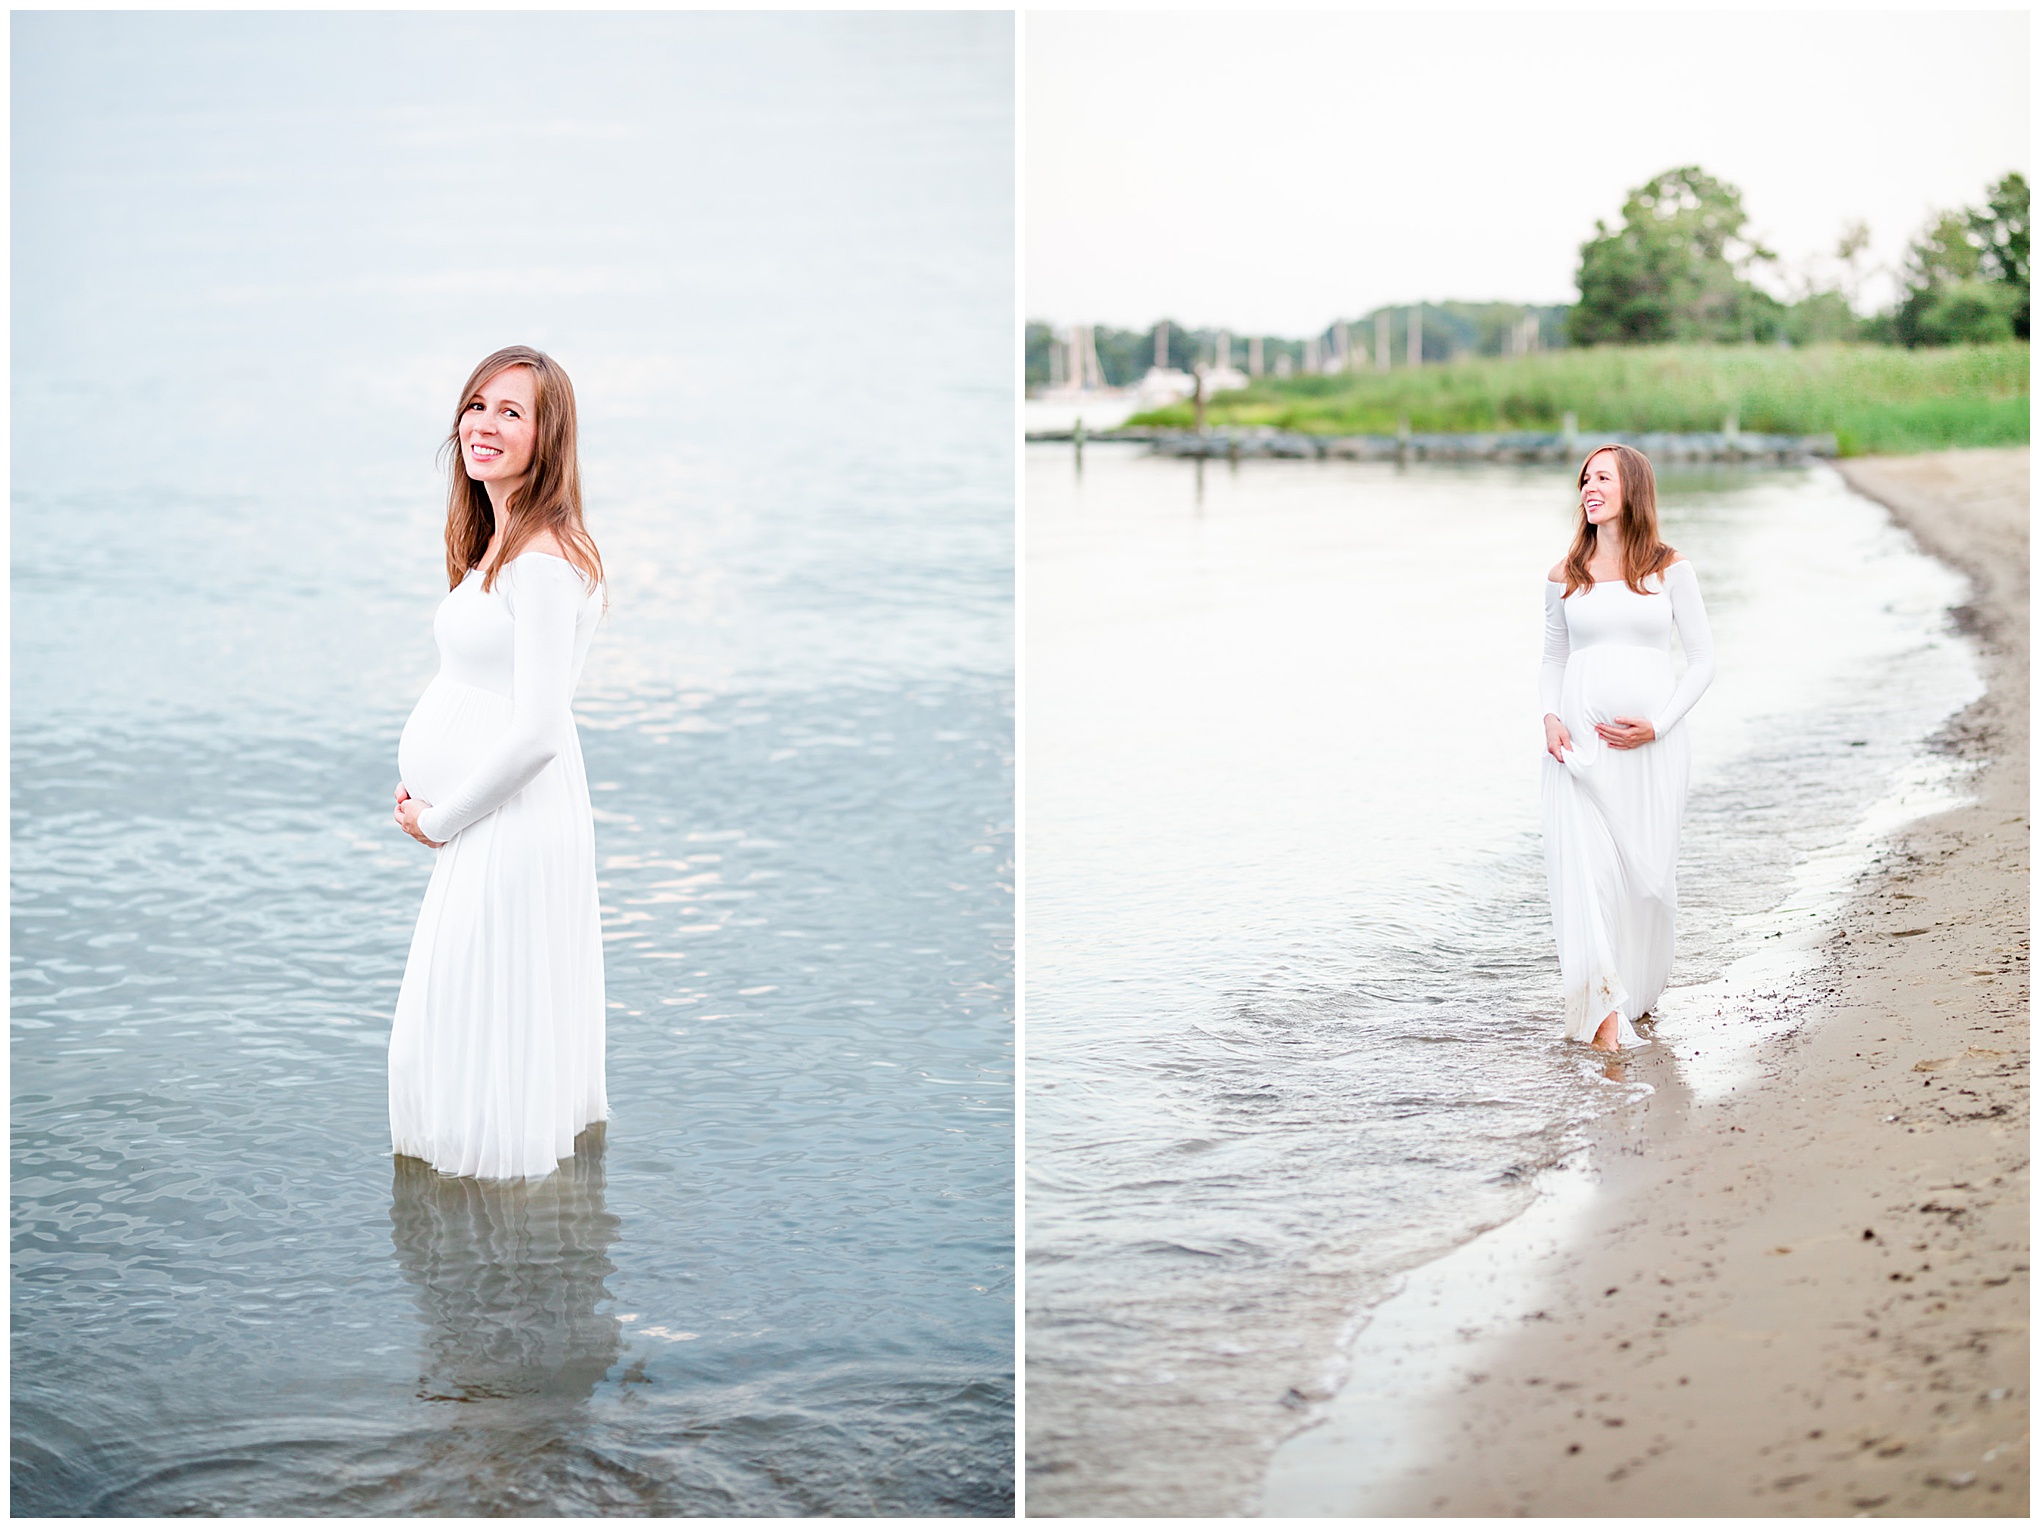 Annapolis waterfront maternity photos, Annapolis maternity photos, Annapolis maternity photographer, summer waterfront portraits, waterfront portraits, sunset portraits, sunset maternity portraits, sunset maternity photos, Annapolis photographer, DC maternity portraits, DC maternity photos, DC maternity photographer, Rachel E.H. Photography, summer maternity photos, maternity photos style, woman standing in water